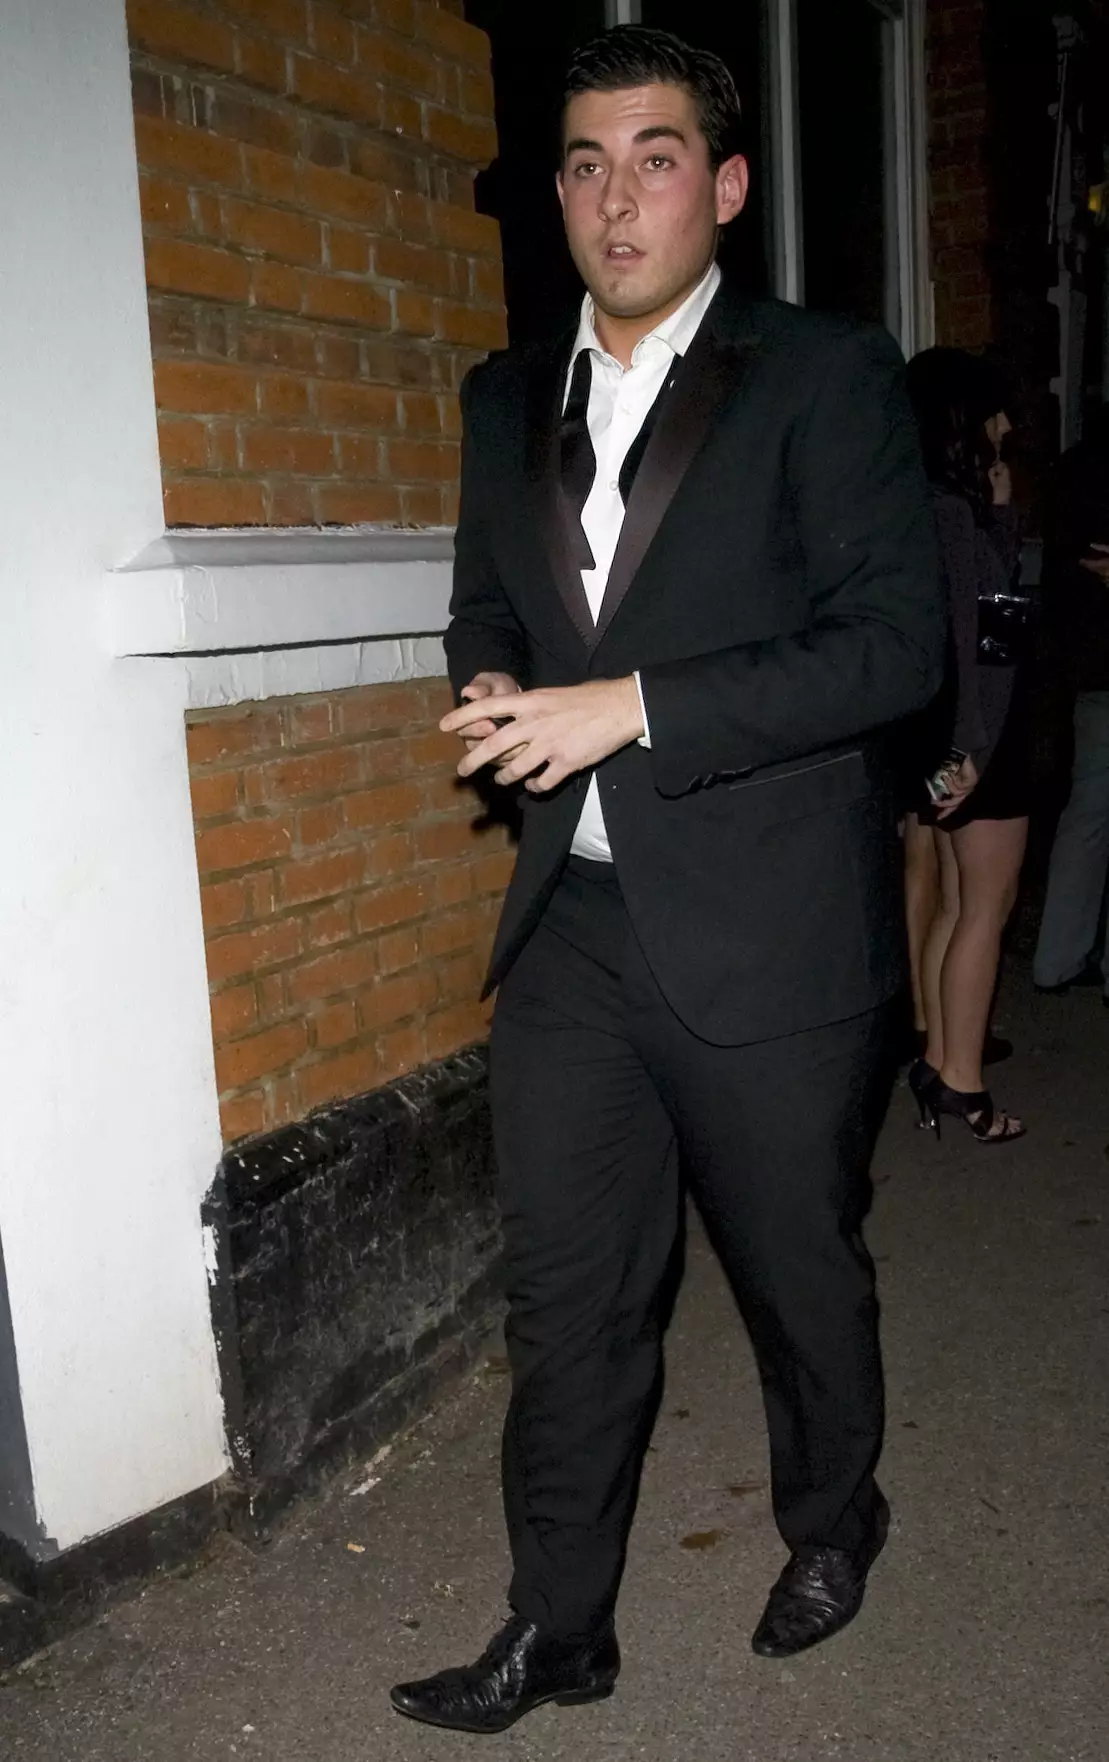 Arg has struggled with his weight, as well with alcohol and drug issues, since he shot to fame (